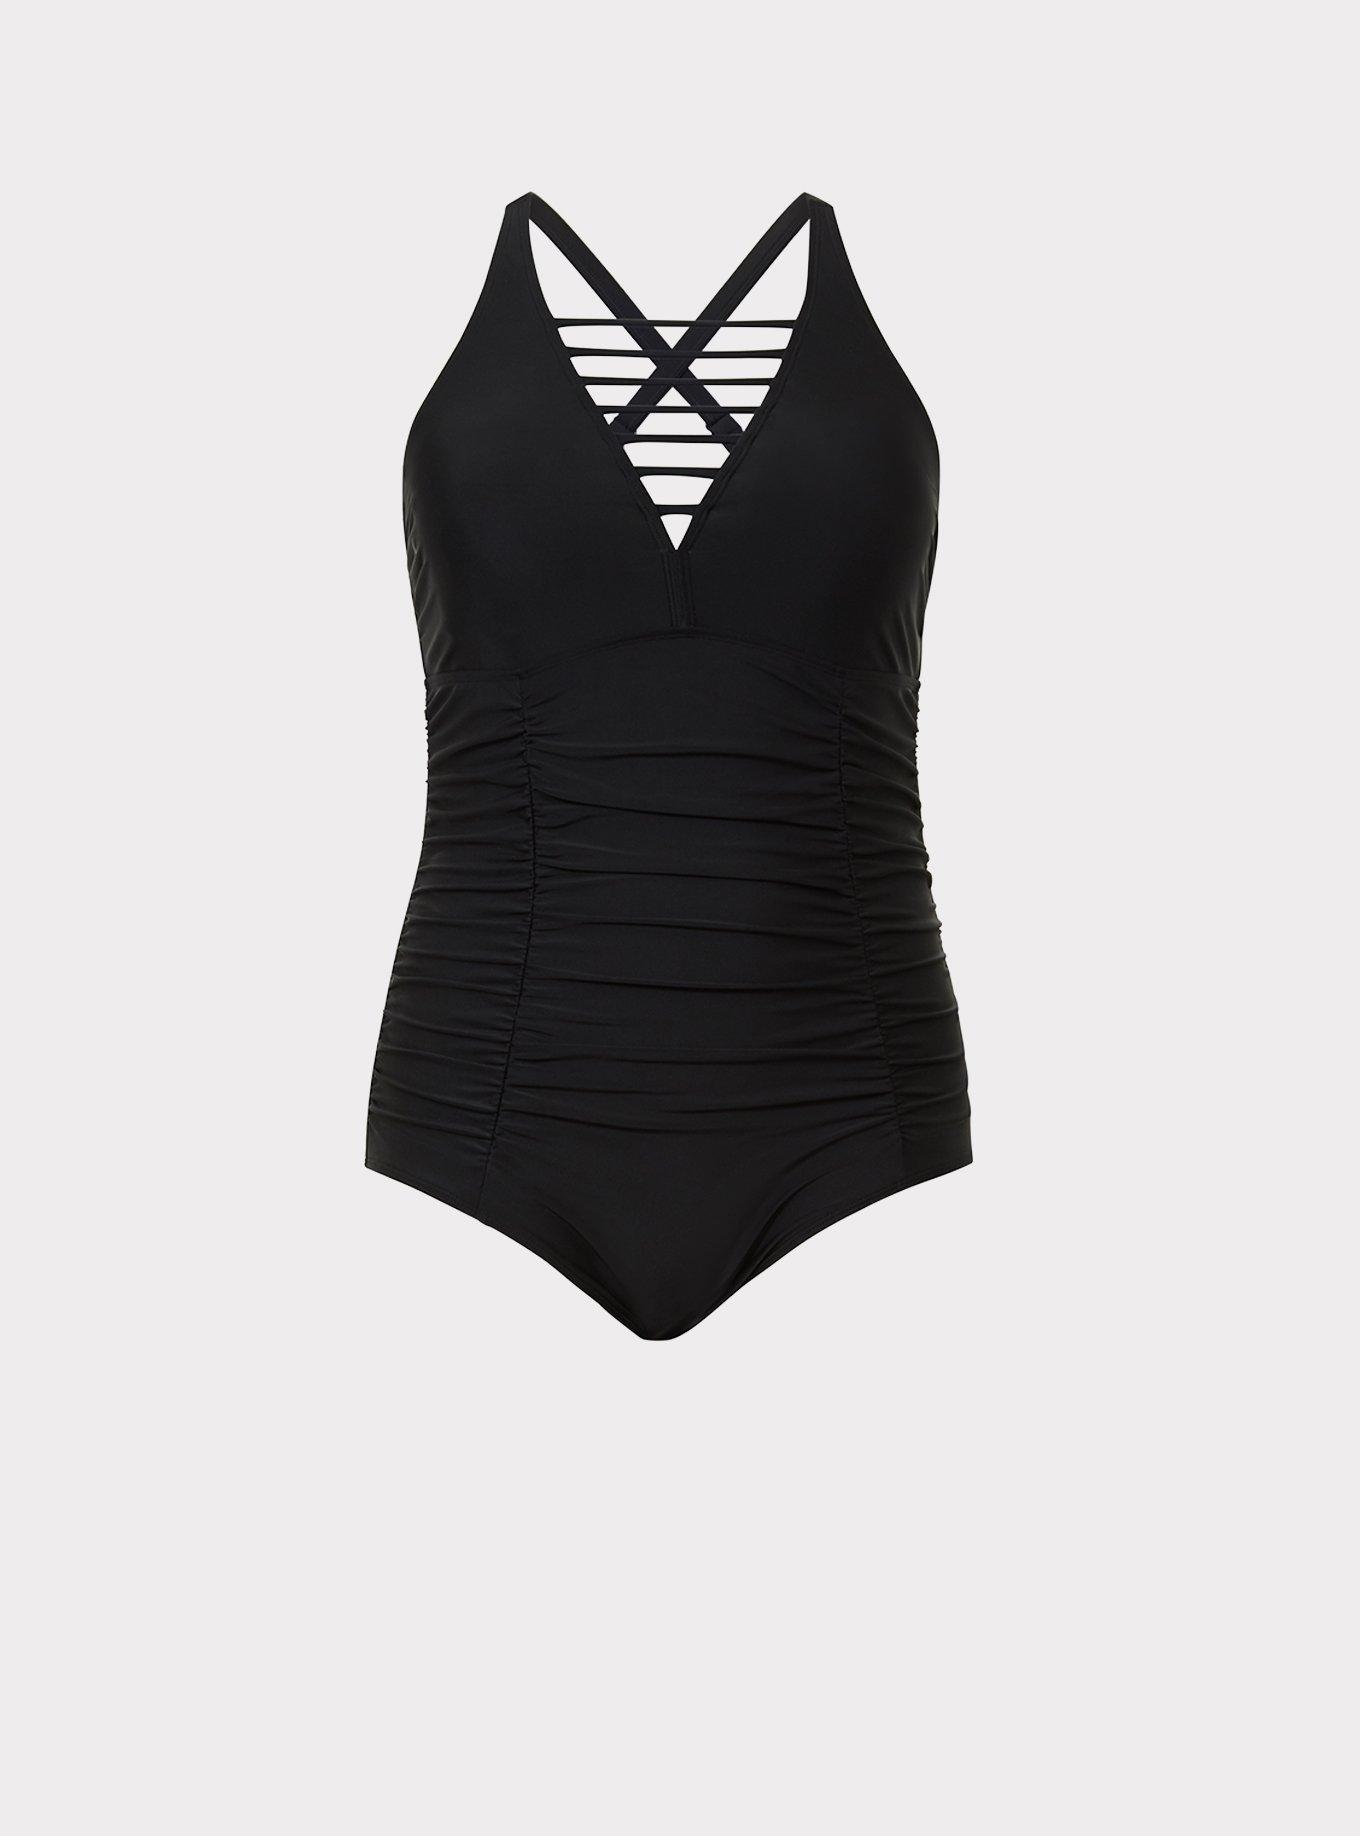 As an AA cup I've always struggled with finding swimwear that fit. I